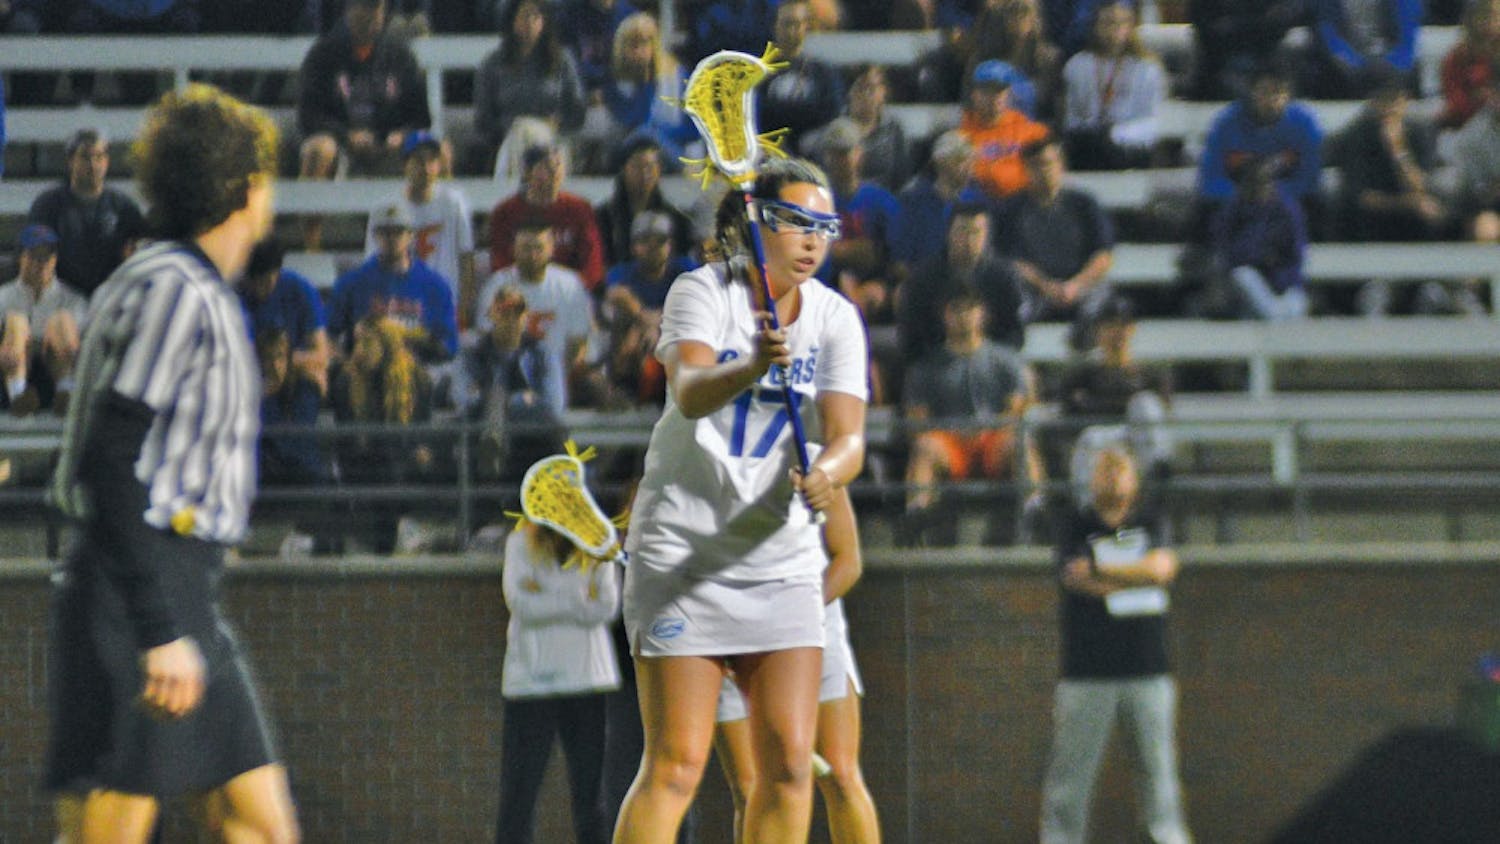 Midfielder Shannon Kavanagh recorded a career-high eight points and 13 draw controls in Florida's 16-5 win over UConn on Saturday.
&nbsp;